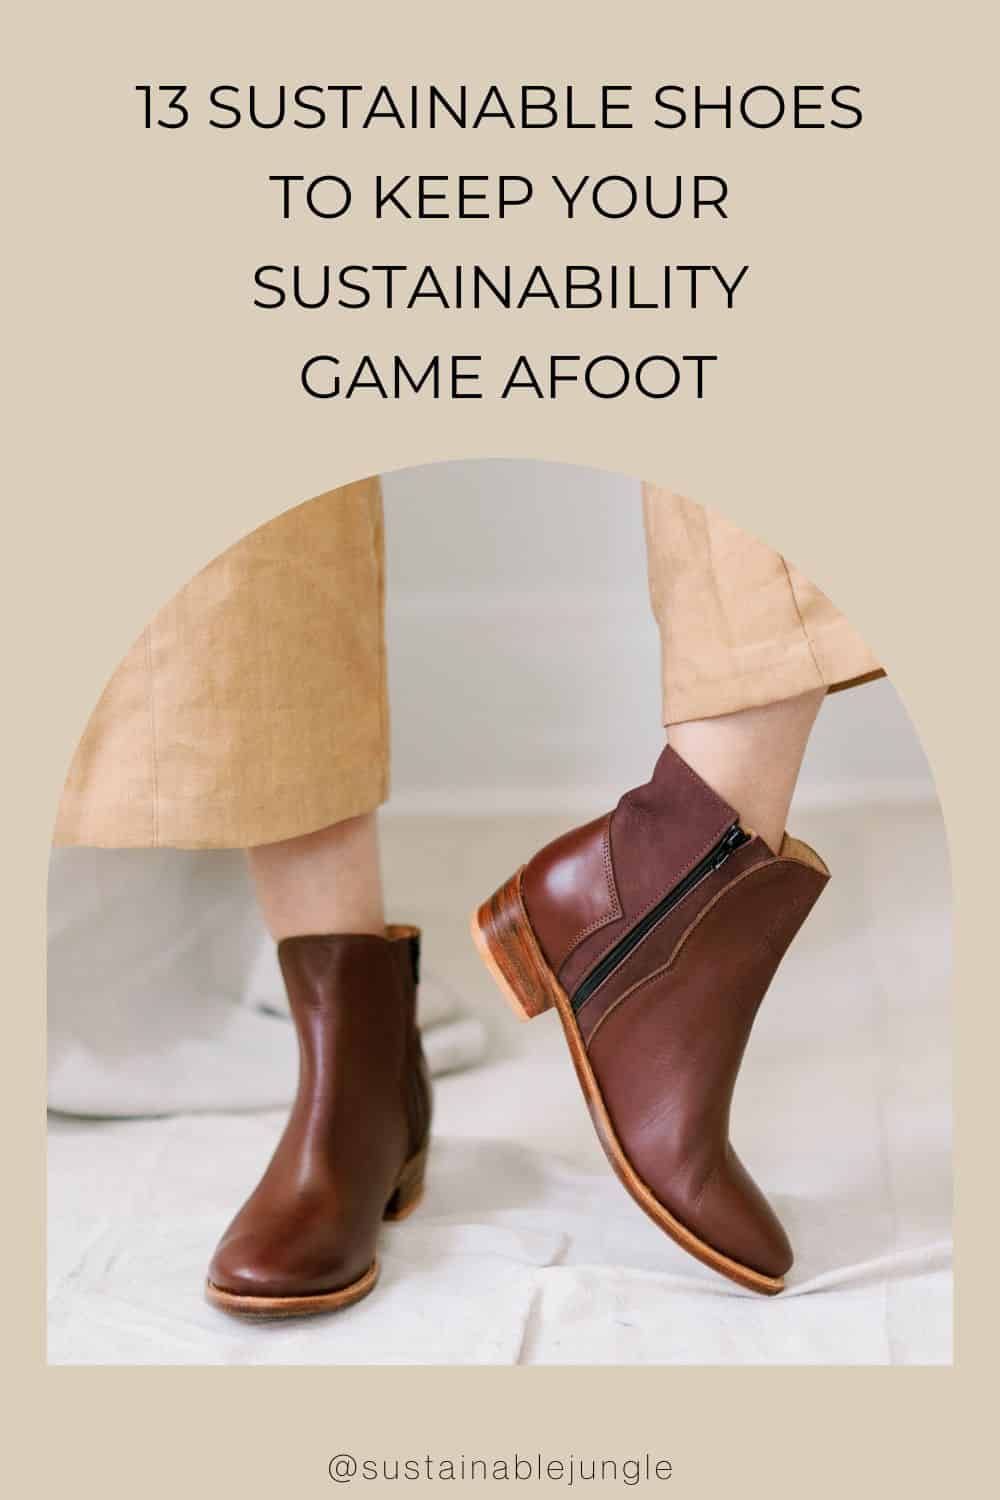 13 Sustainable Shoes To Keep Your Sustainability Game Afoot Image by The Root Collective #sustainableshoes #sustainableshoebrands #sustainablewomensshoes #ecofriendlyshoes #ecofriendlymensshoes #bestsustainableshoes #sustainablejungle